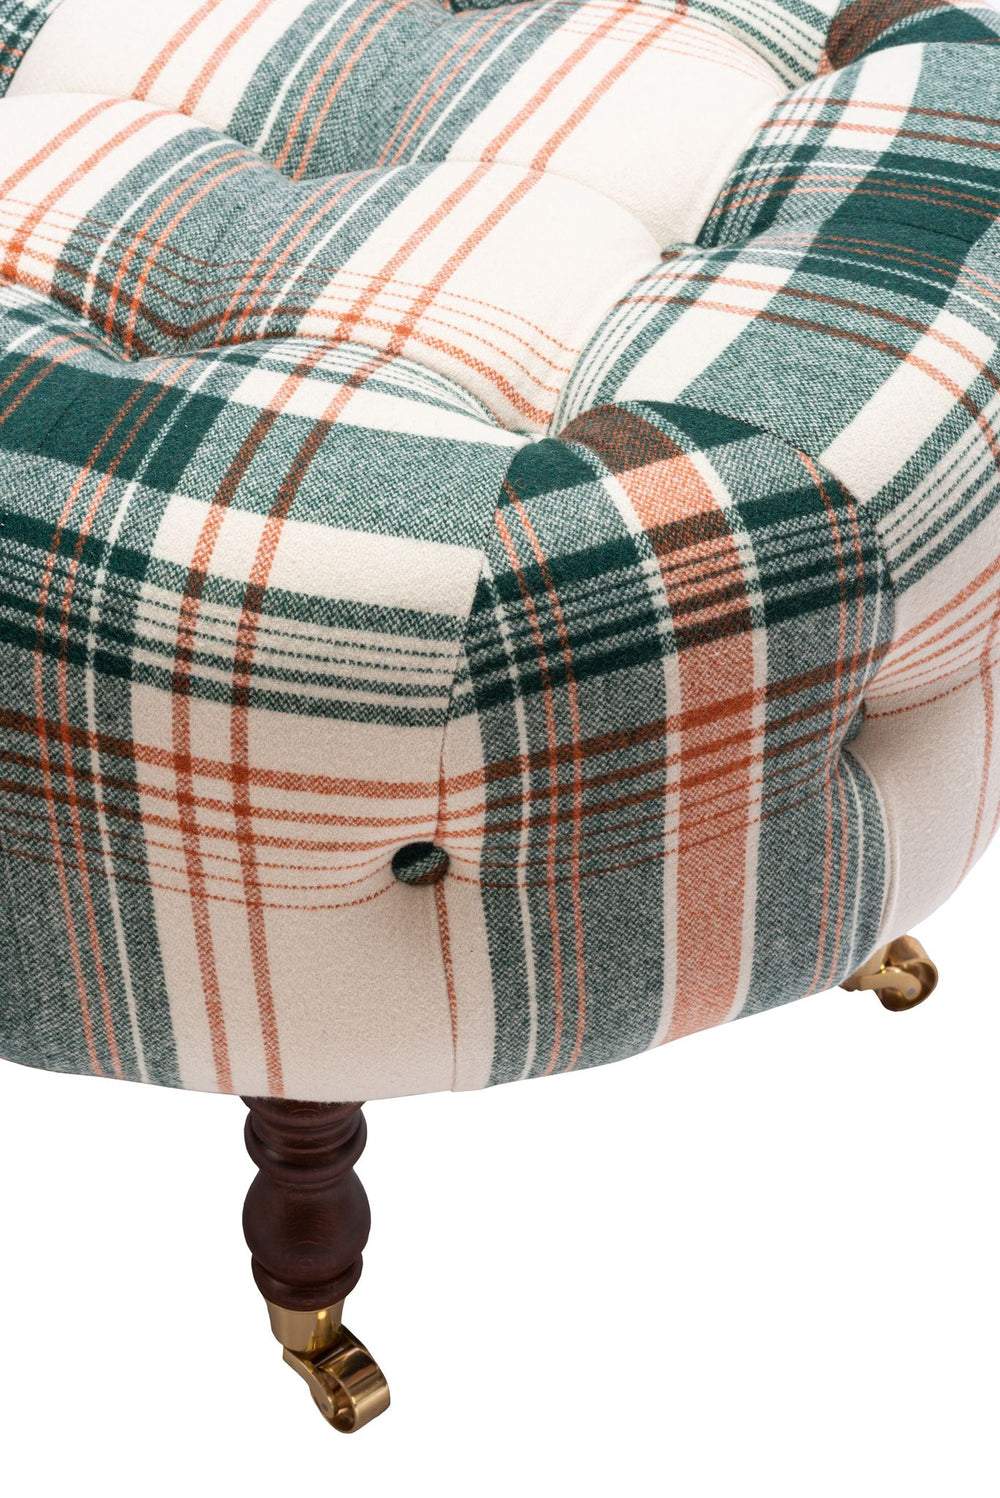 Fez tufted stool - Monterey Plaid Woodstock Luxury Collection Foot Stool, Foot Rest, Ottoman